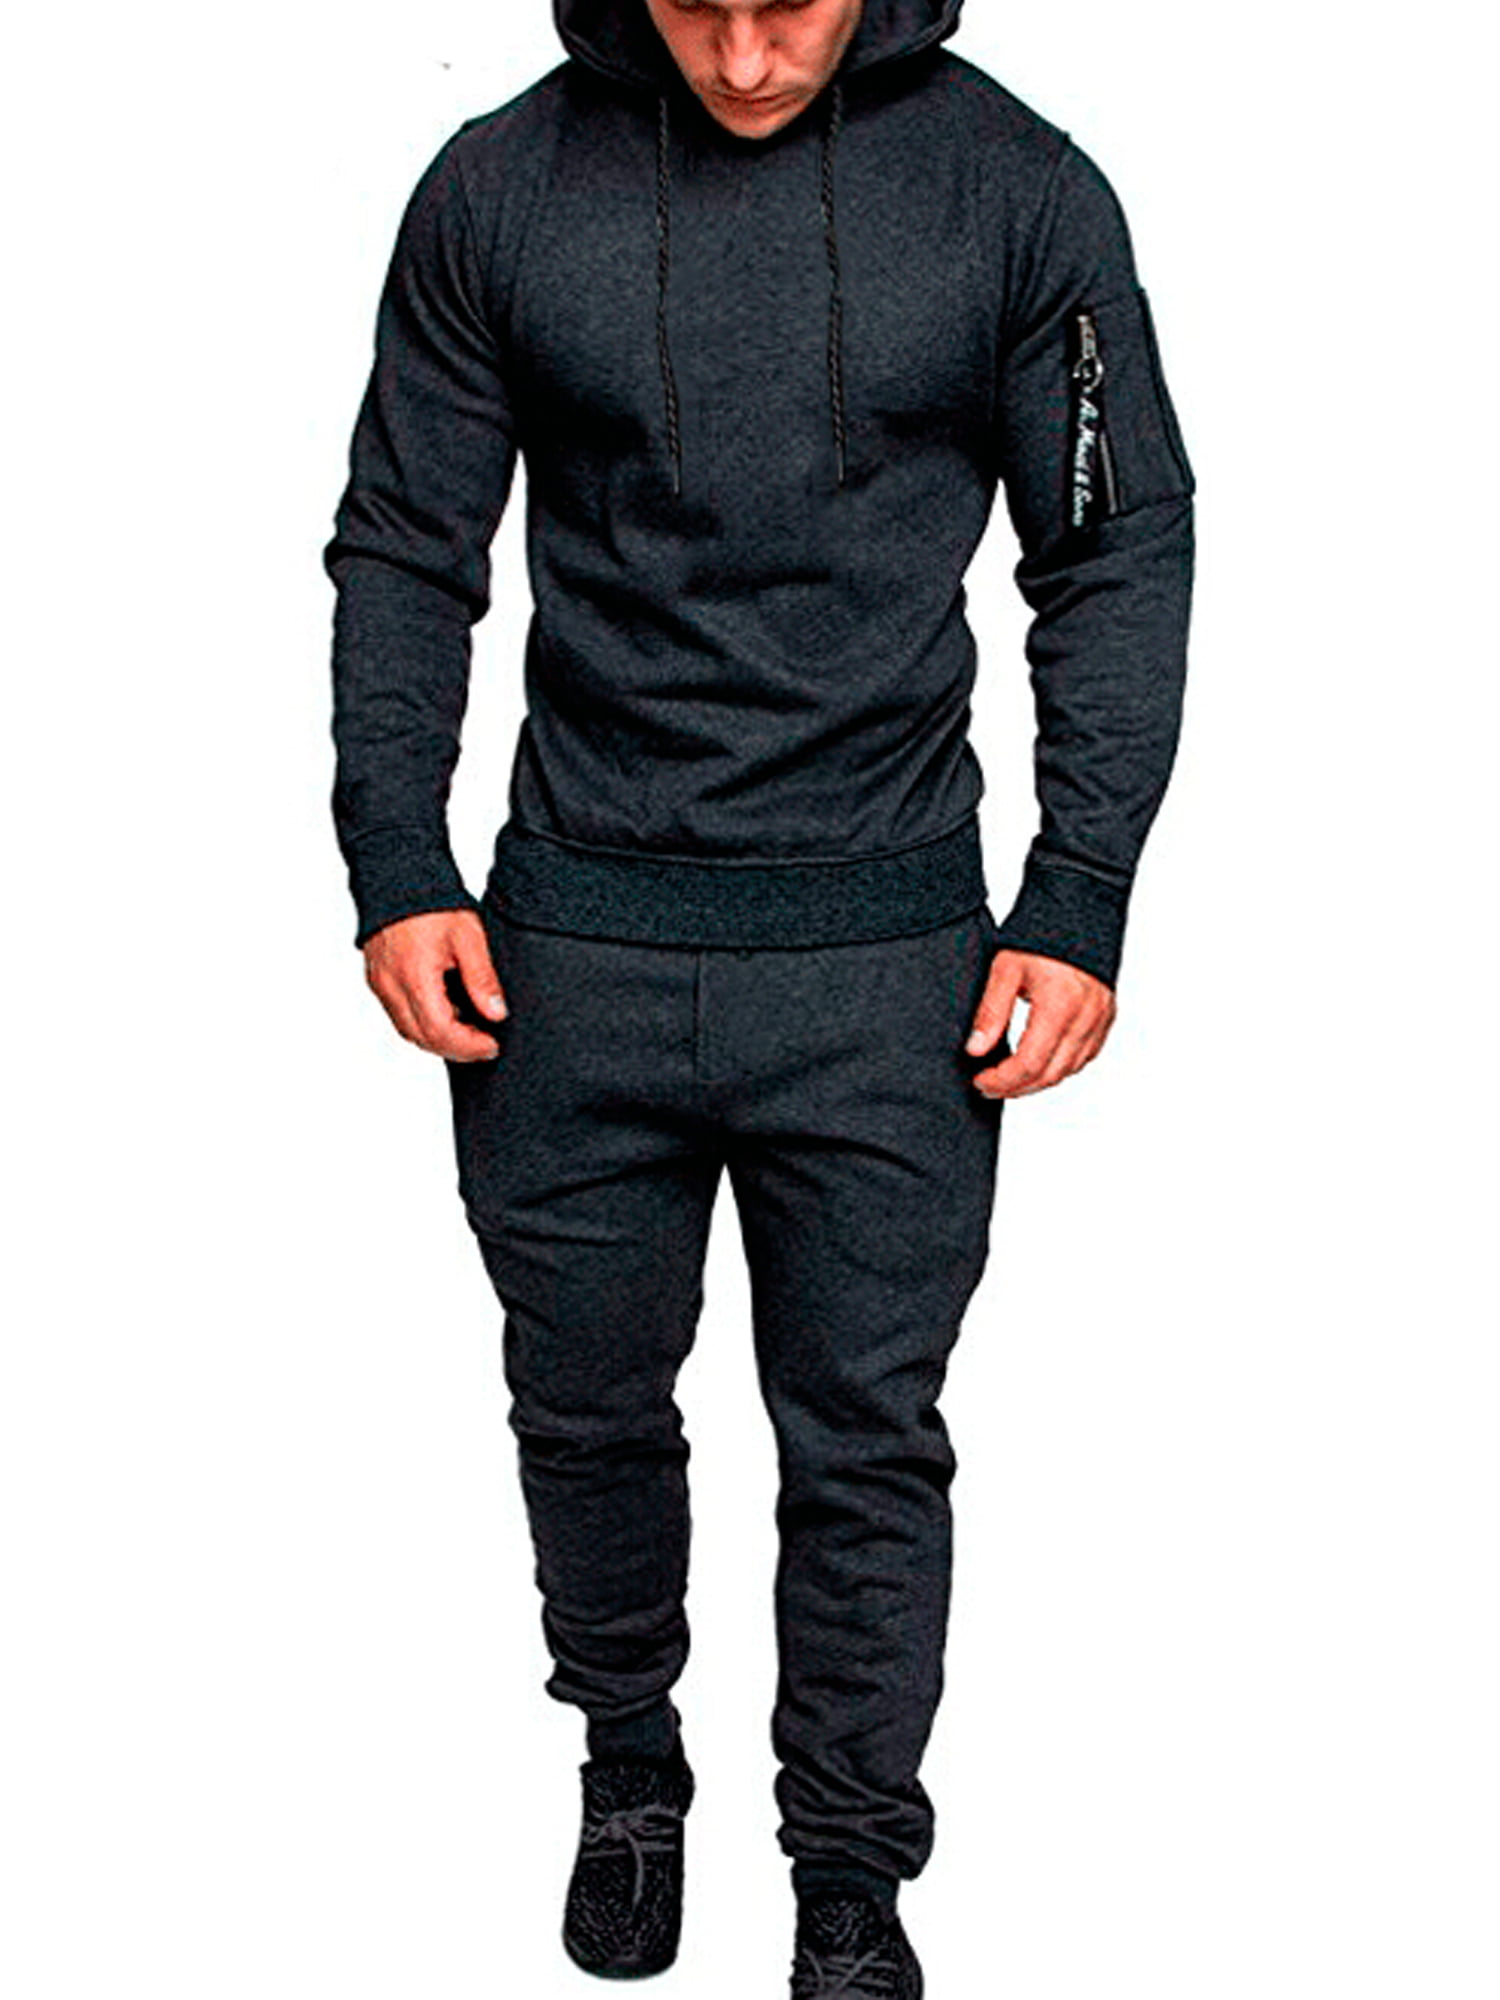 Smeiling Mens Fashion Athletic Jogger Fitness Workout Hoodie Sweatshirt Jacket